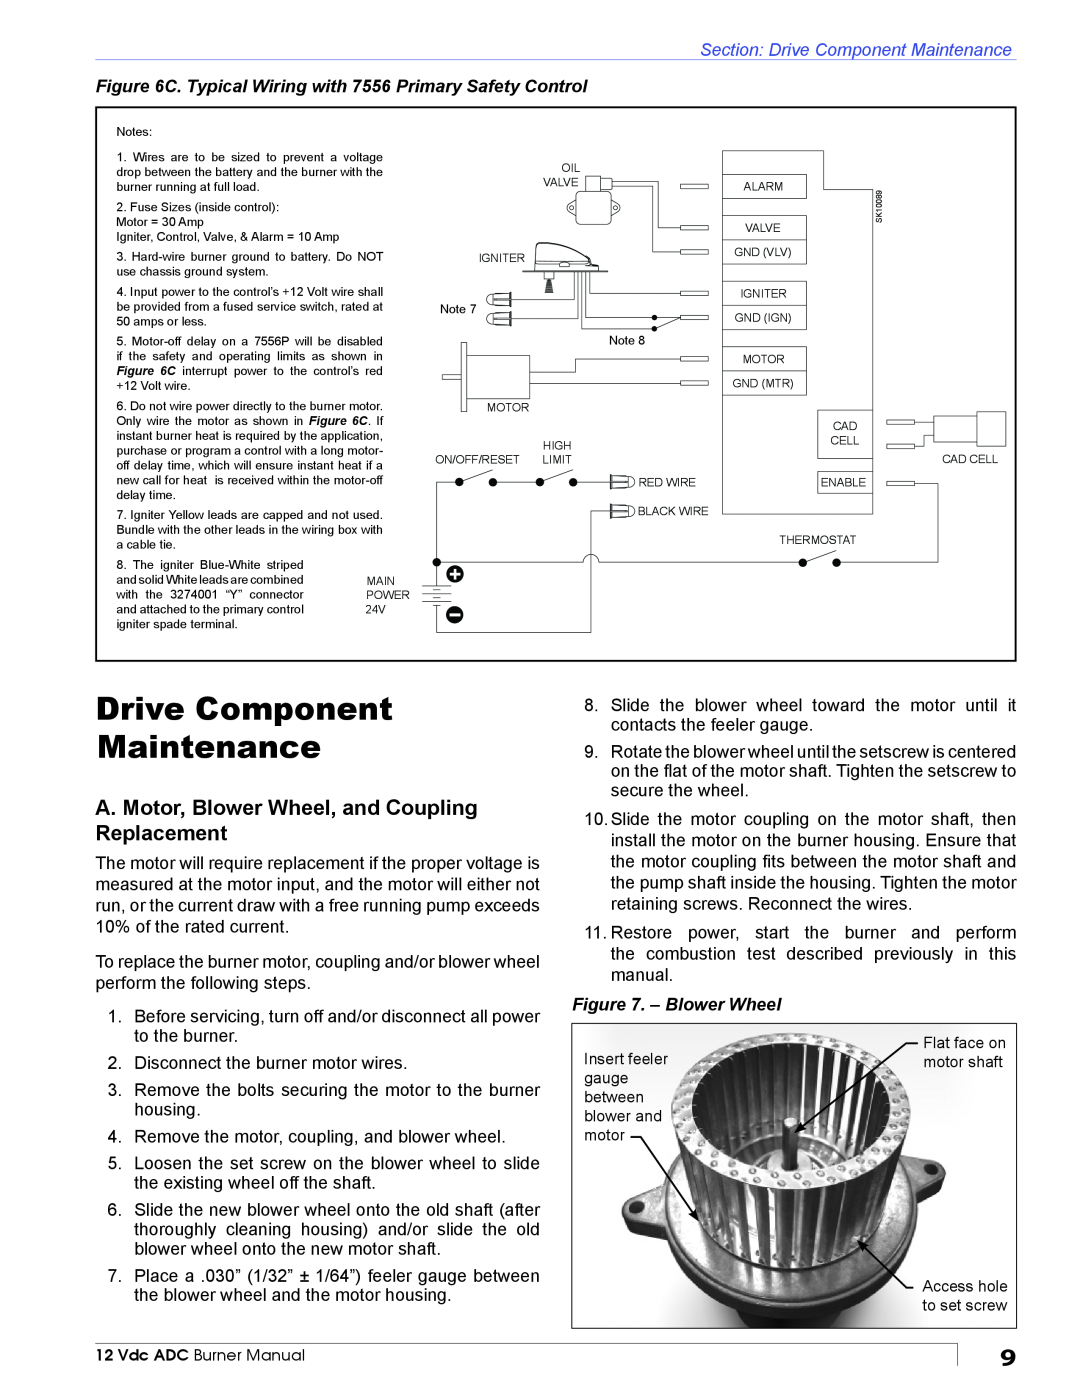 Beckett ADC manual Drive Component Maintenance, A. Motor, Blower Wheel, and Coupling Replacement 